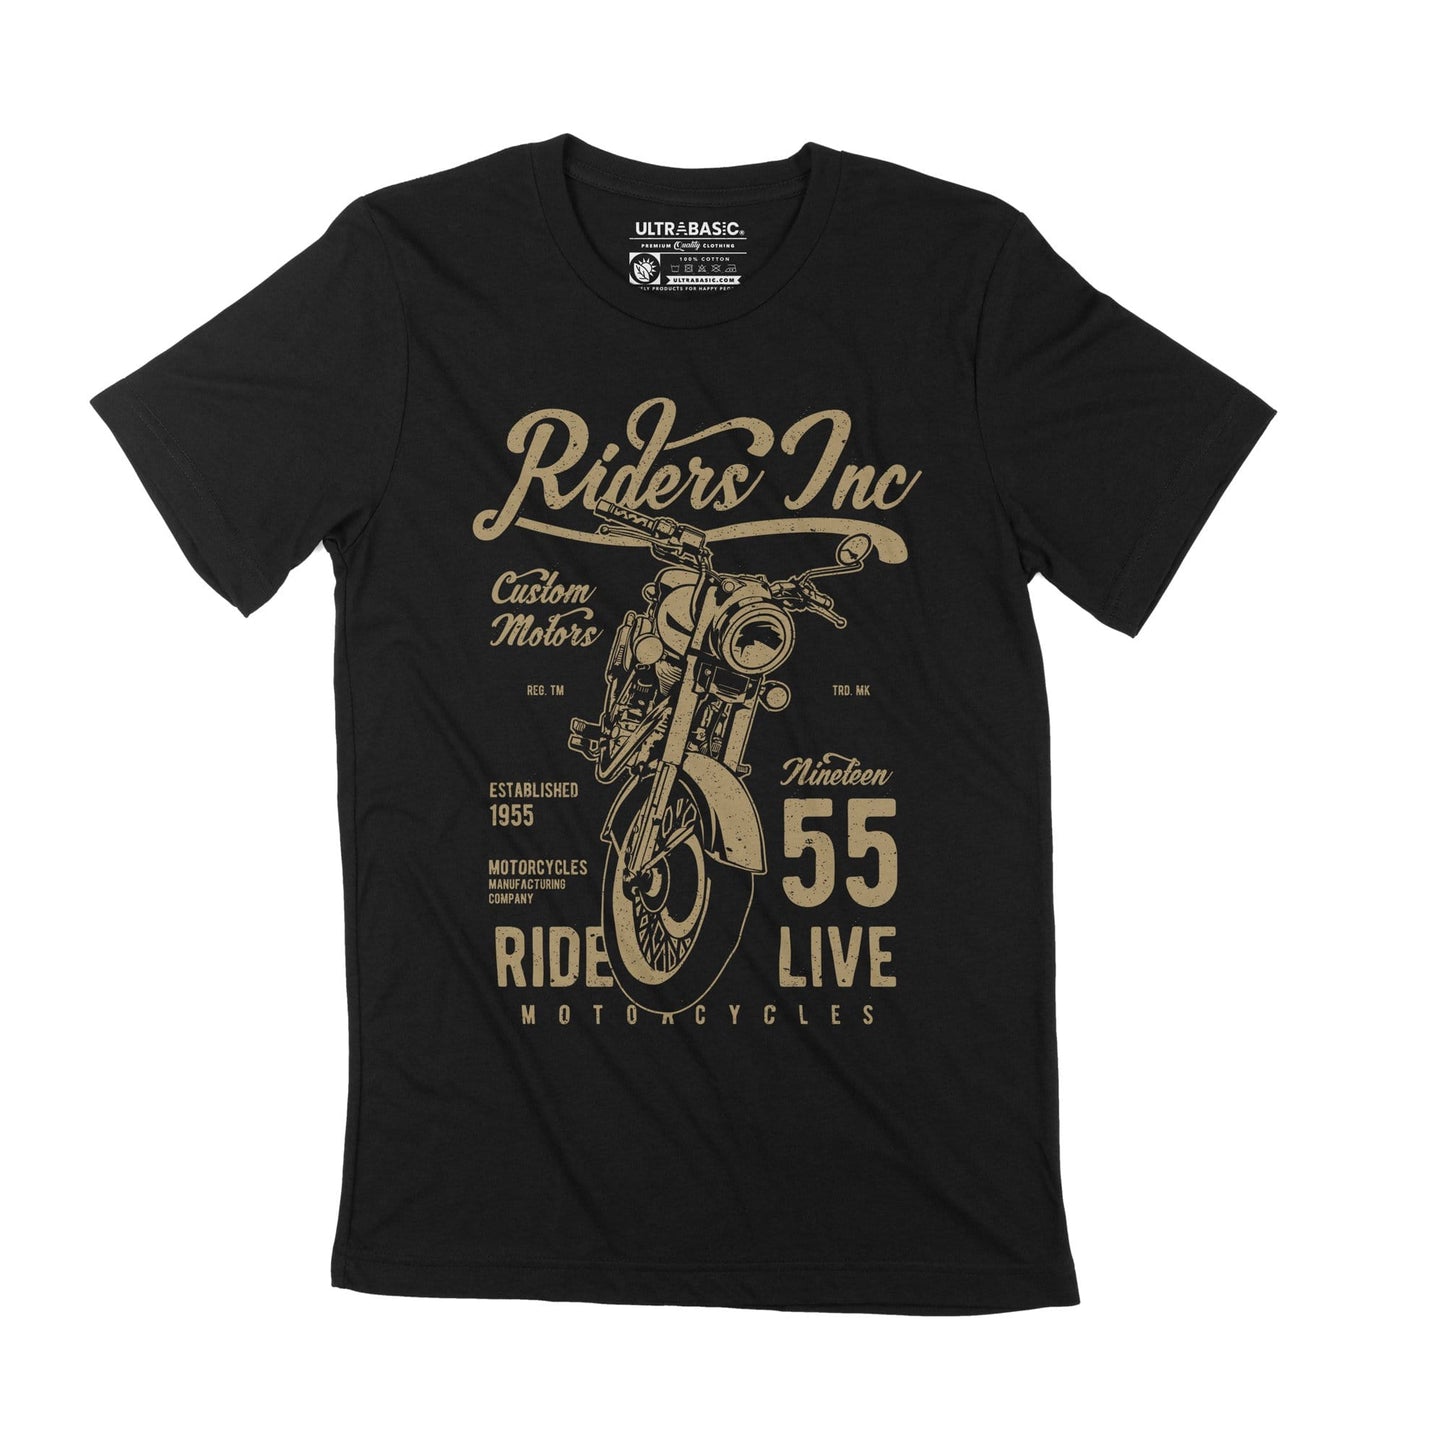 ULTRABASIC Live Ride Motorcycles Men's T-Shirt - Custom Motors Established 1955 life behind bars engine mechanic clothes classic oldtimer clothing outdoor fashion victory outfits usa guy apparel unisex motorbike genuine motorcycle merchandise highway bike speed street casual fast dad fathers day racer slogan graphic present